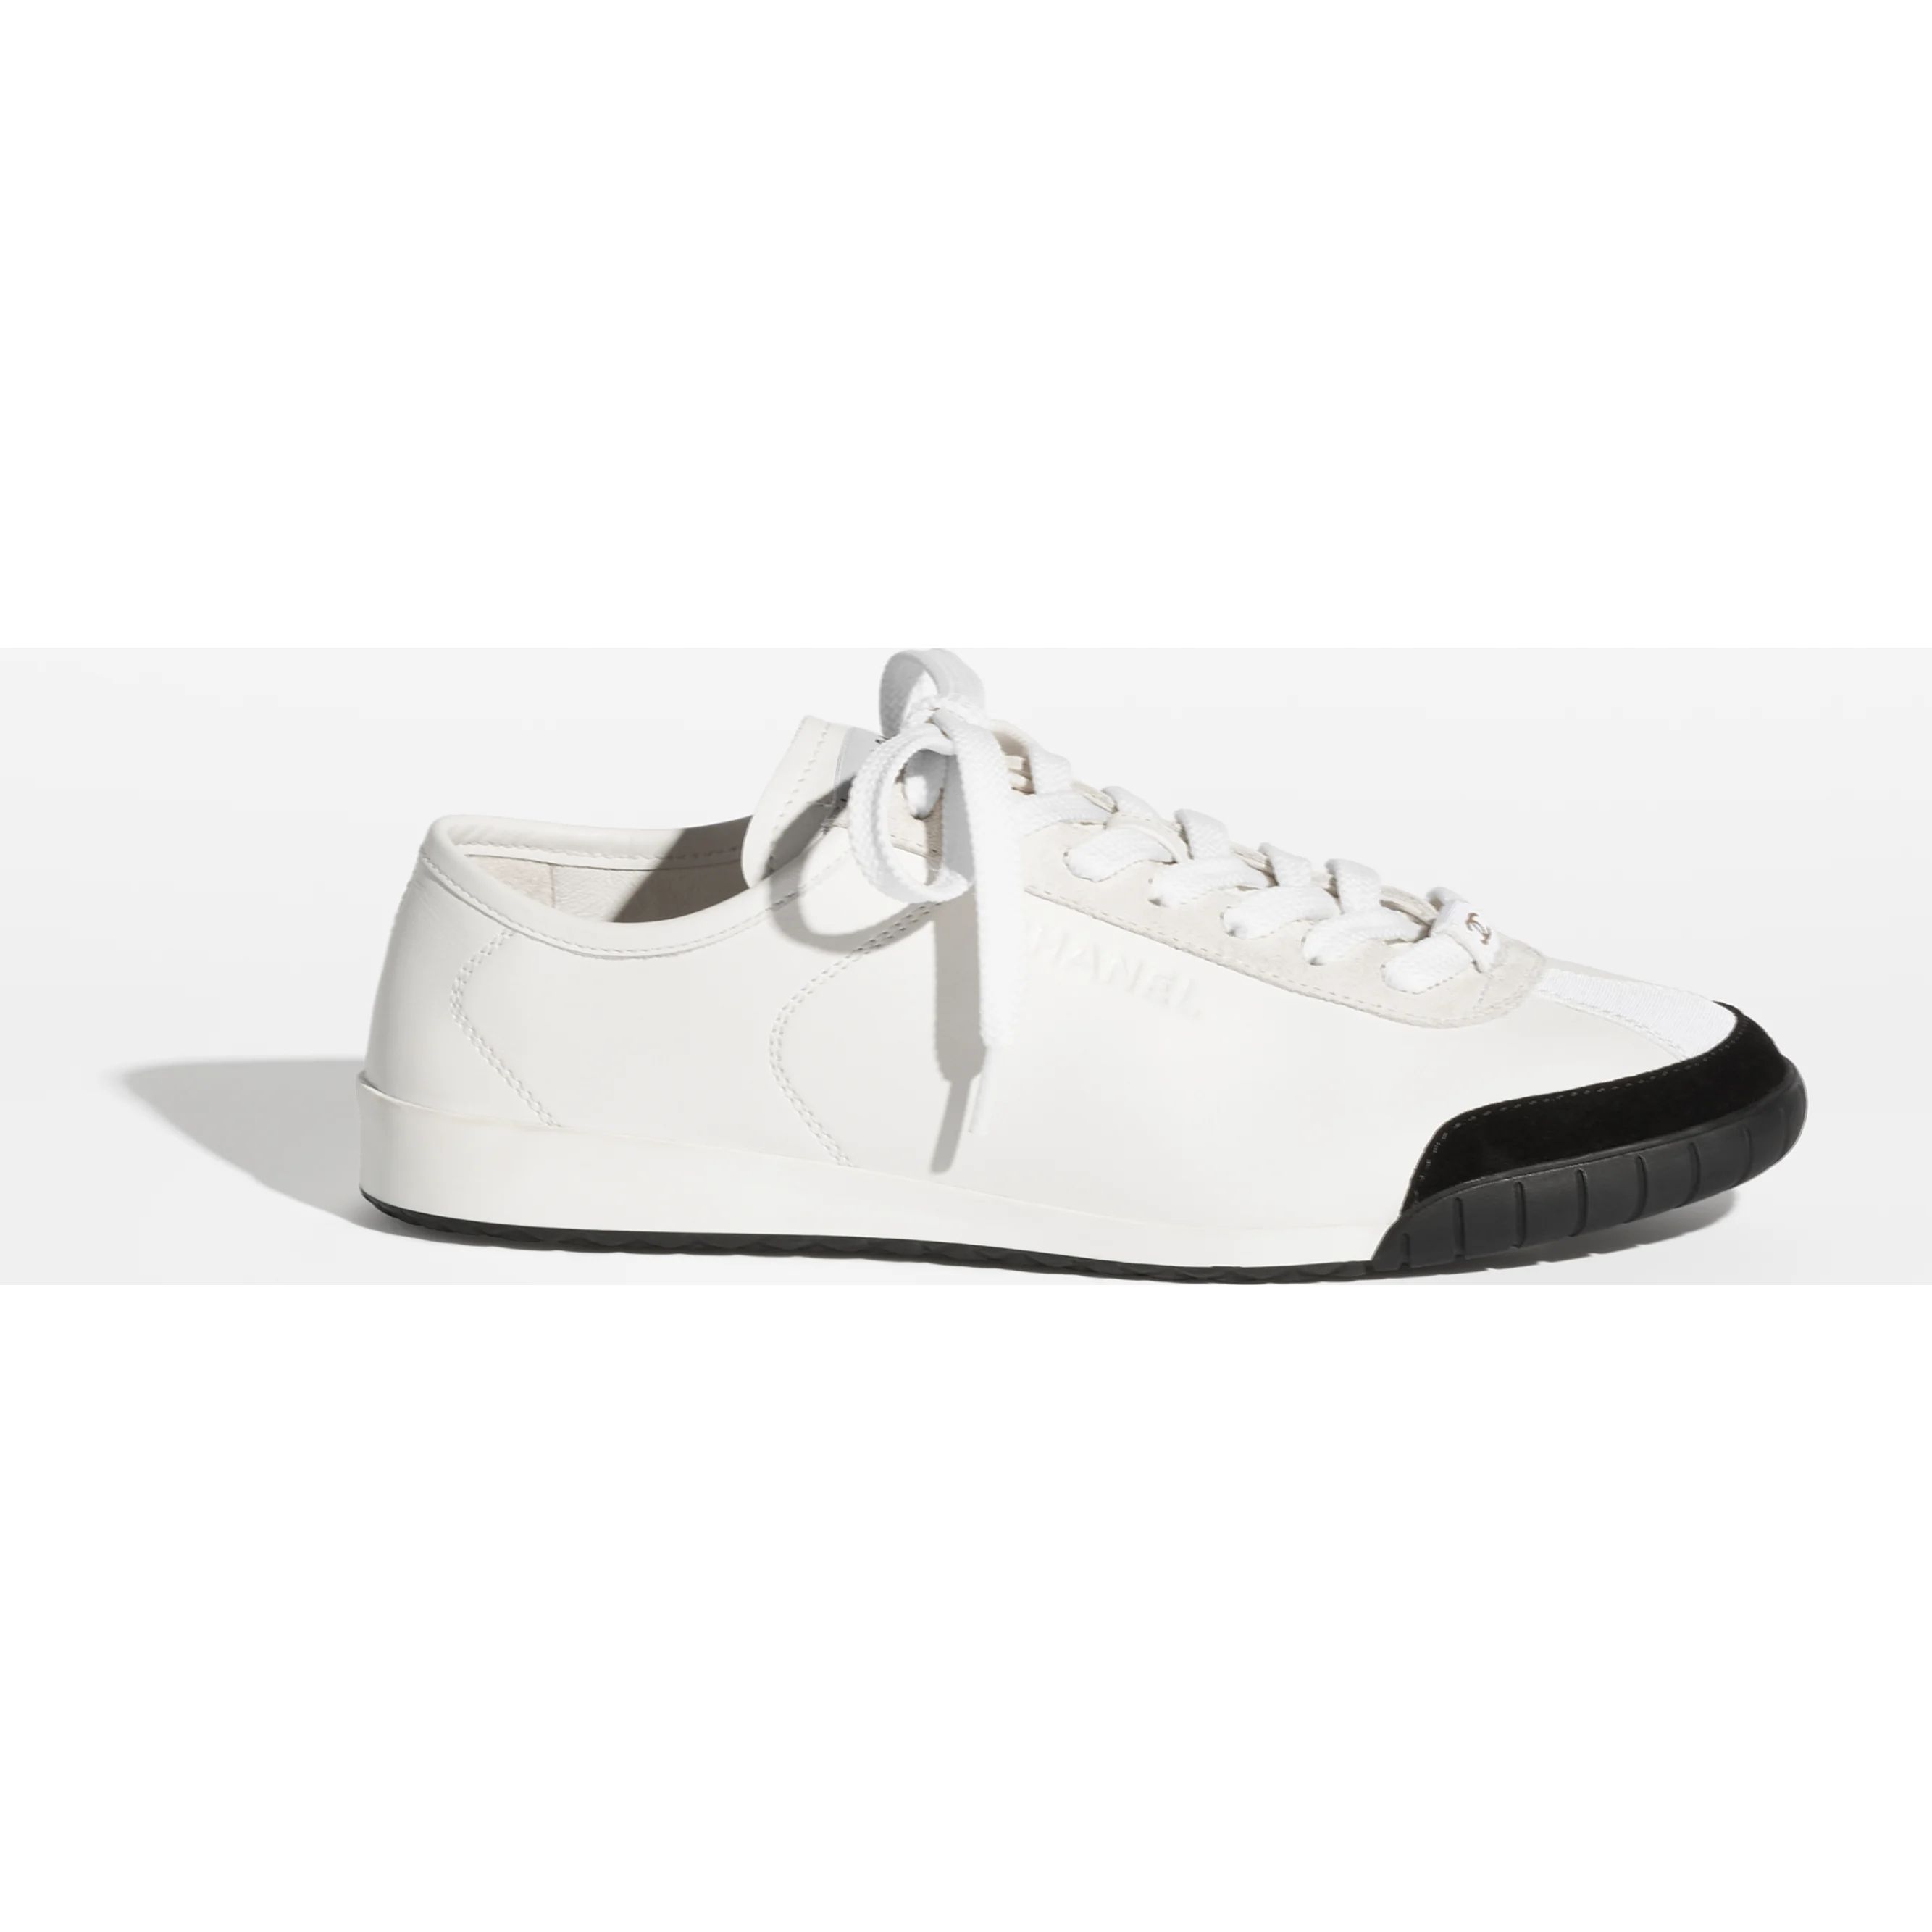 Sneakers | Chanel, Inc. (US)